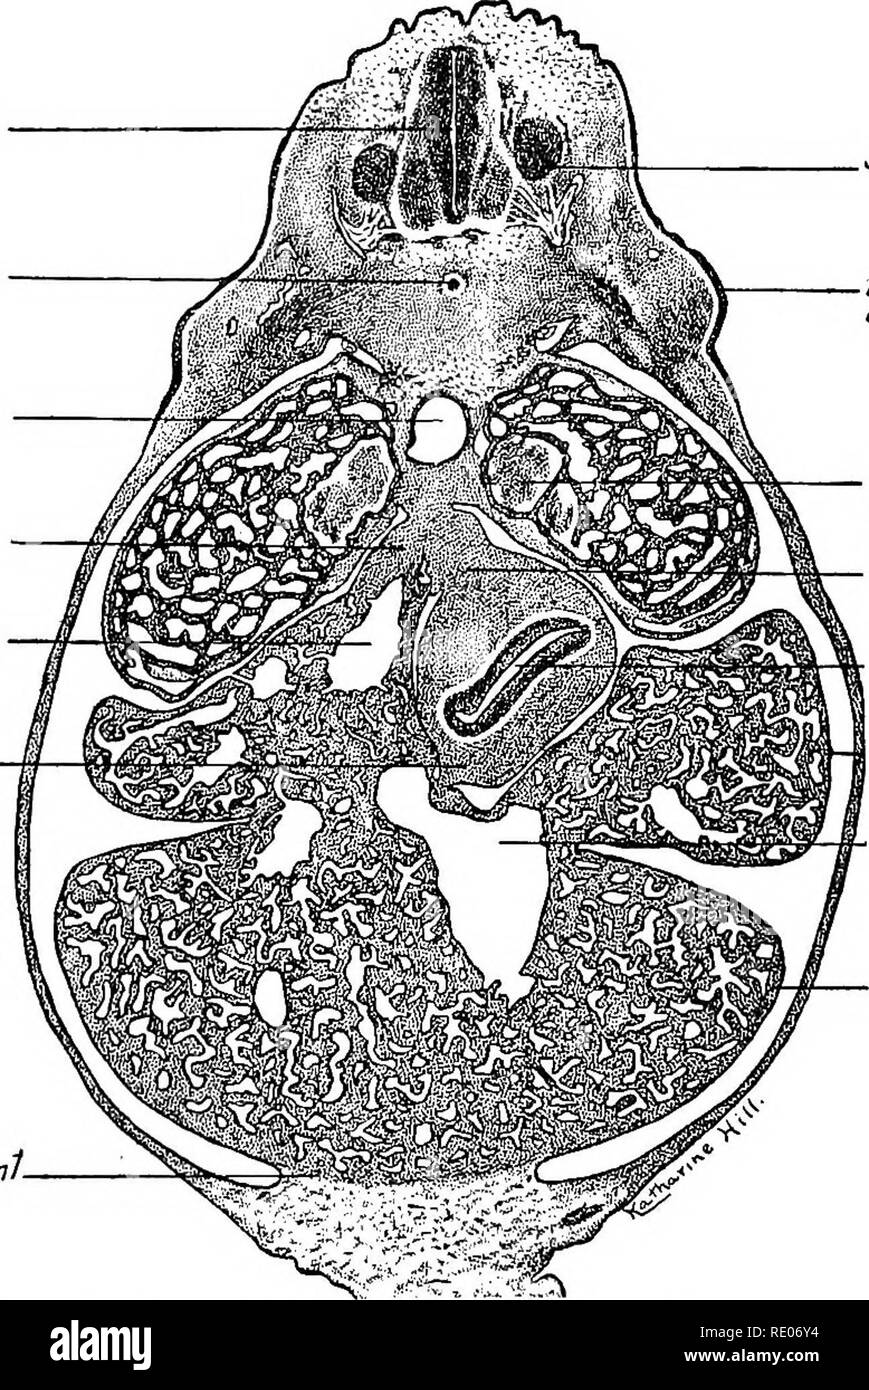 . A laboratory manual and text-book of embryology. Embryology. Sympathetic gang. Postcard, vein Mesonephri'c tubule Peritoneal cavity D.lobe of Liver Â« ,-,- ,-mj*jJâ.Sinusoids of ^^ liver Ductus venosus/ Fig. 132.âDorsal half of a transverse section through the lung buds cranial to the stomach in a 10 mm. pig embryo. X 22.5. Post. card, vein, posterior cardinal vein. Spinal cord Notochord Dorsal aorta Plica venae cawae Inf. vena cava Lesser amentum. Spinal gang. Base of, , upper limb Glomerulus of mesonephros Greater omentum Stomach 0. lobe of liver Ductus venosus V.lobe of Liver Ventral att Stock Photo